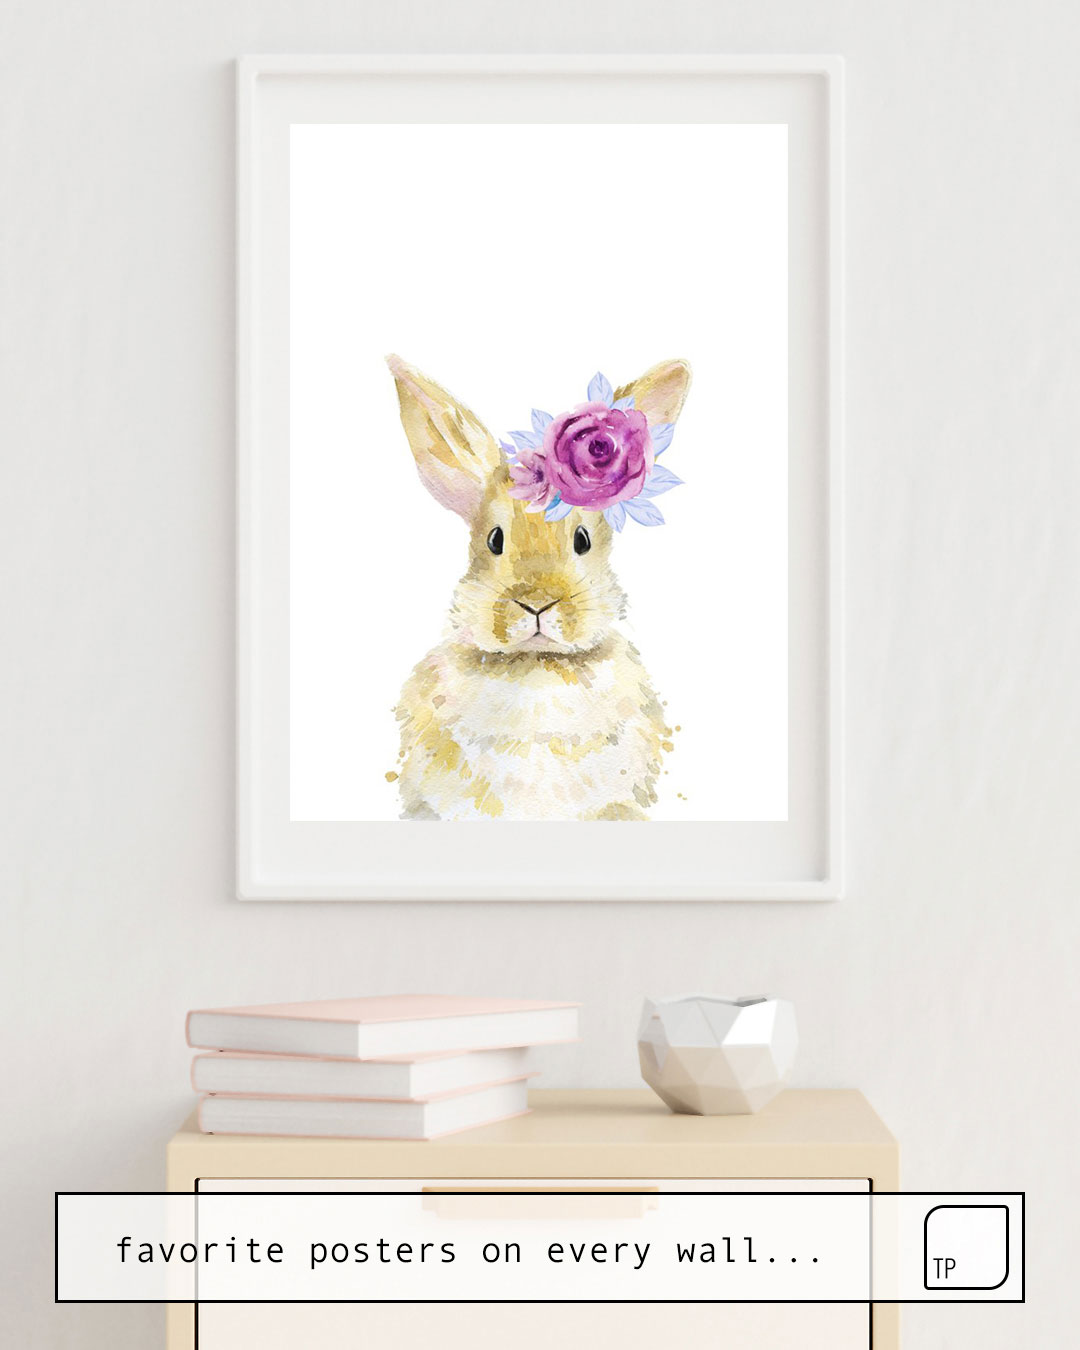 Poster | WATERCOLOUR RABBIT WITH FLOWERS ON THE HEAD. by Art by ASolo